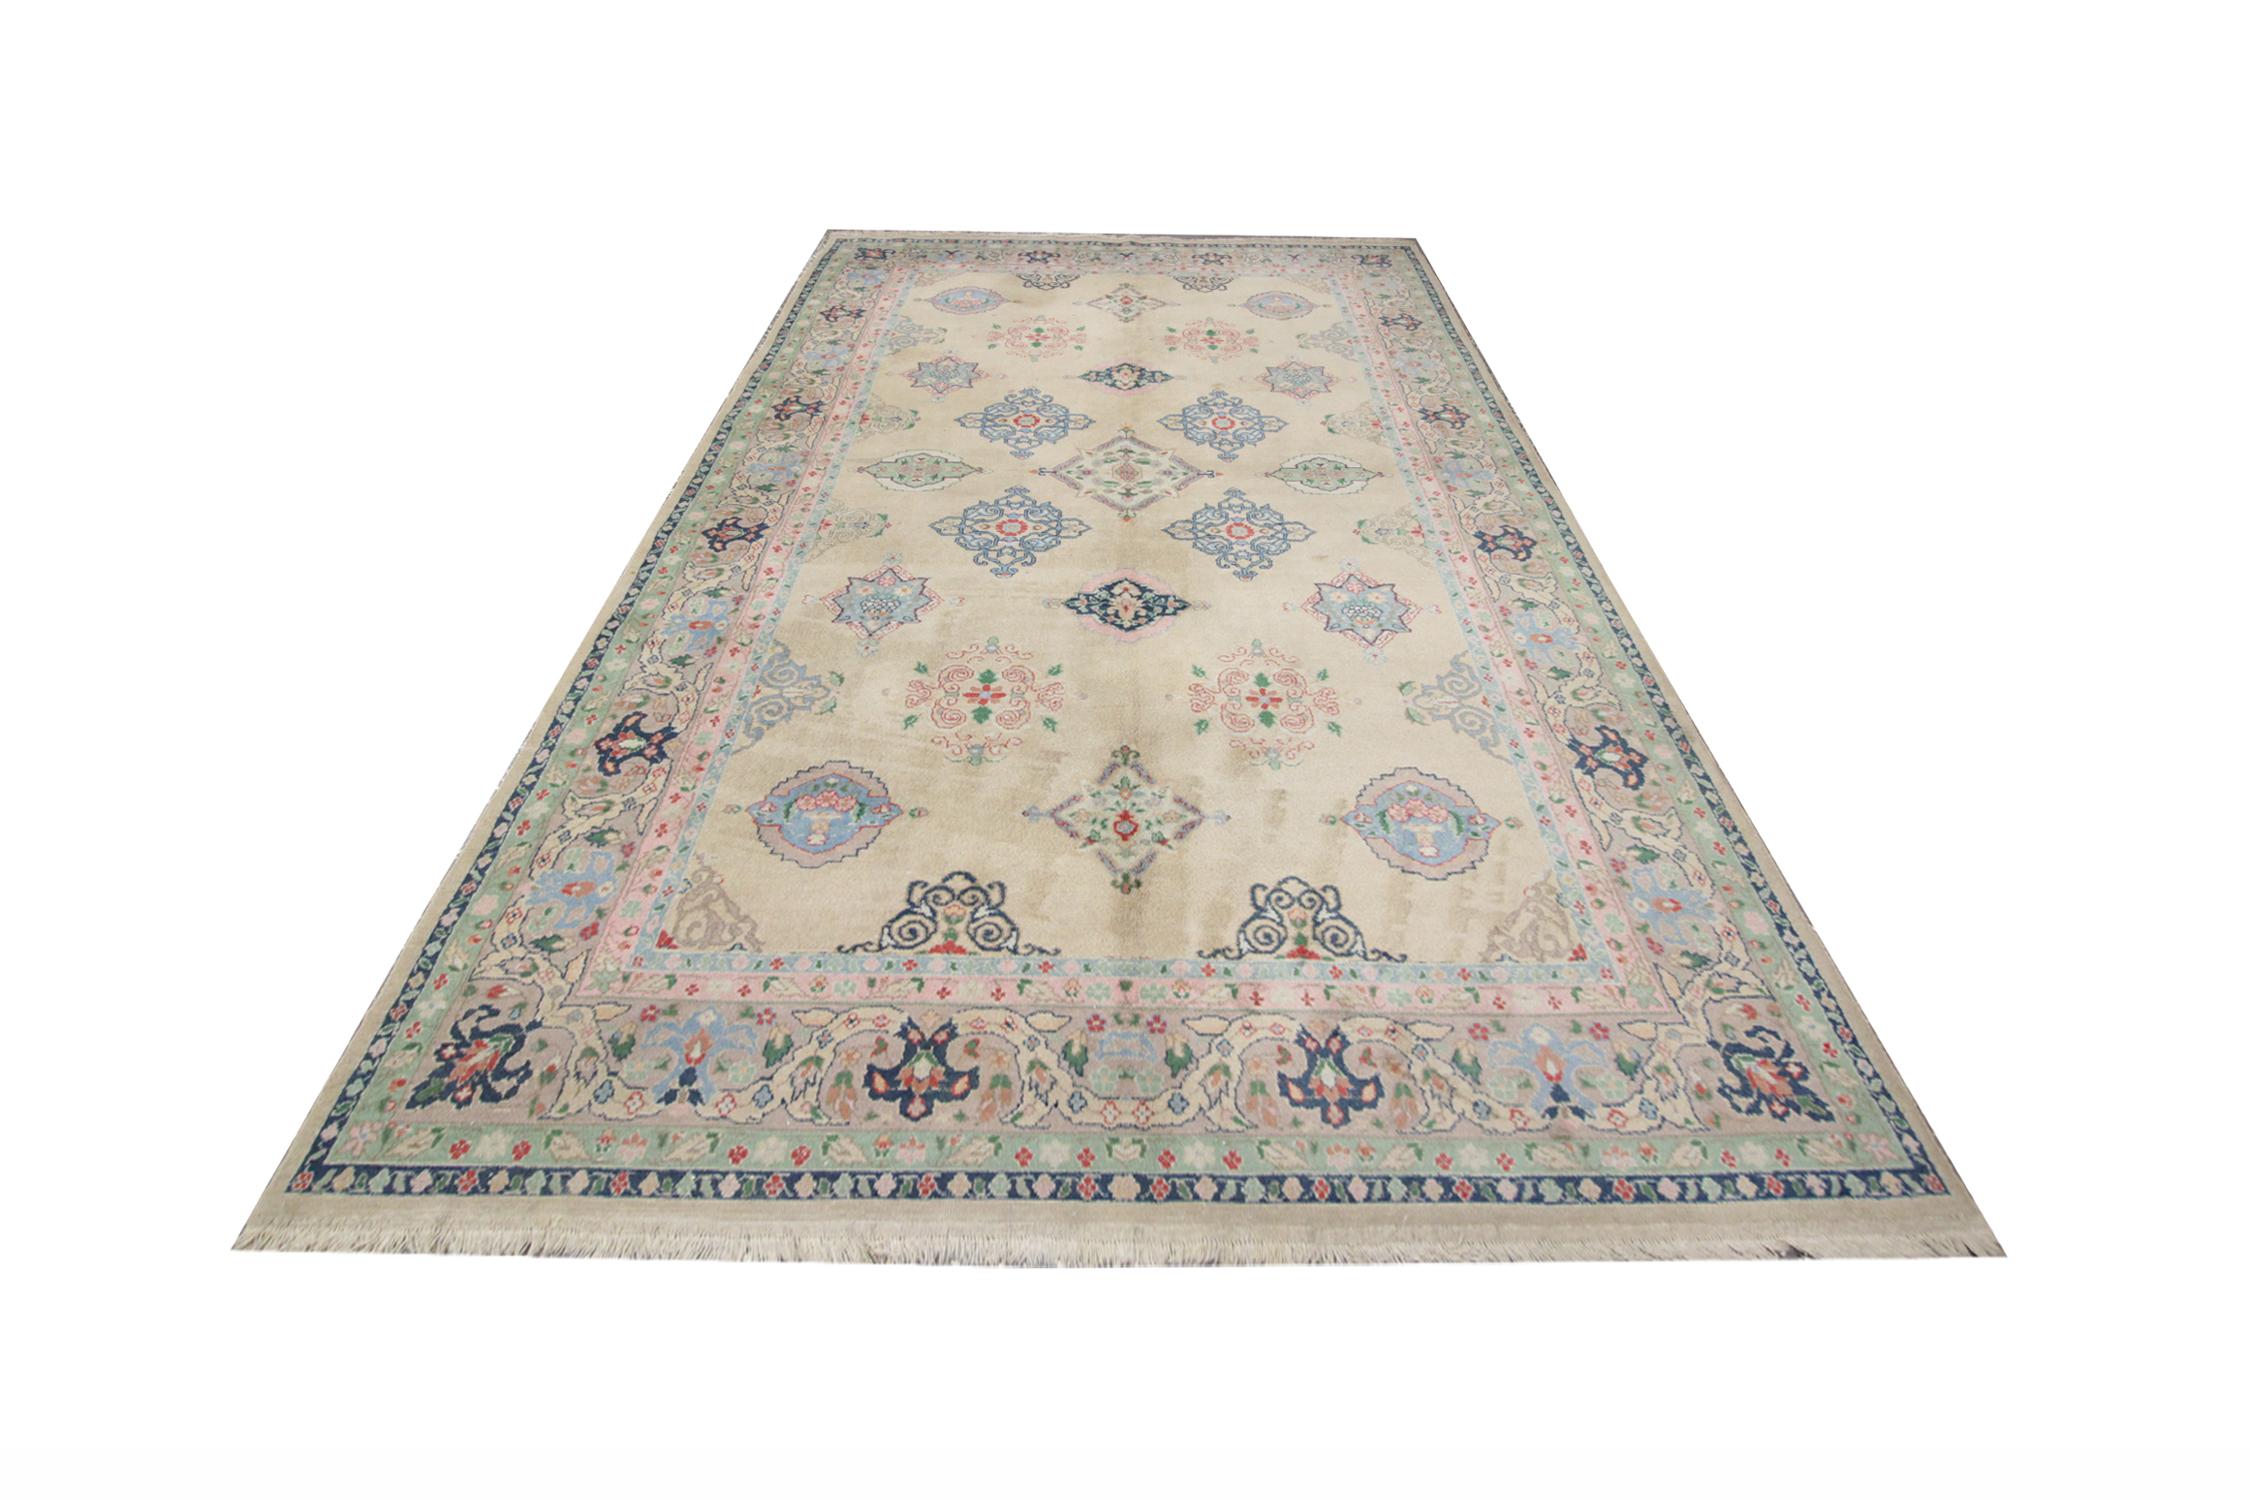 This beautiful area floor rug has been handwoven in subtle yet captivating colourways.  A multi-layered border frames the gorgeous centrepiece starting with a narrow, thin navy border followed by a green floral pattern and a thicker geometric